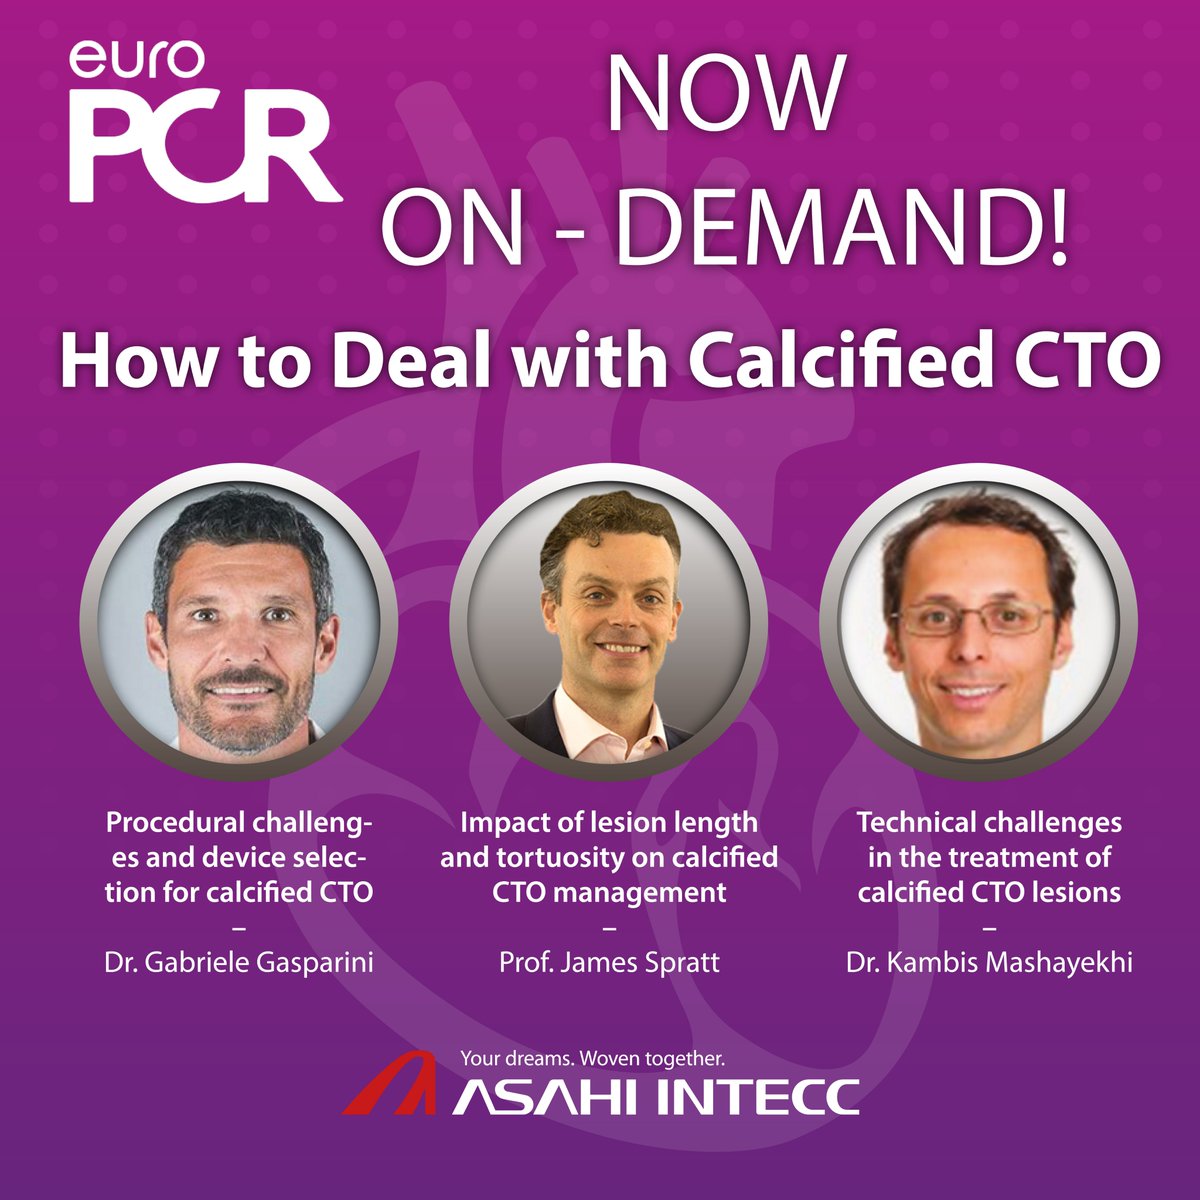 You can now watch “How to Deal with #Calcified #CTO.” on-demand! Watch and learn from an international panel of presenters! youtu.be/XS5w2iEP7VI Speakers: @GLGasparini @jcspratt @KambisMashayek1 #asahiintecc #ASAHI #EuroPCR #CardioTwitter